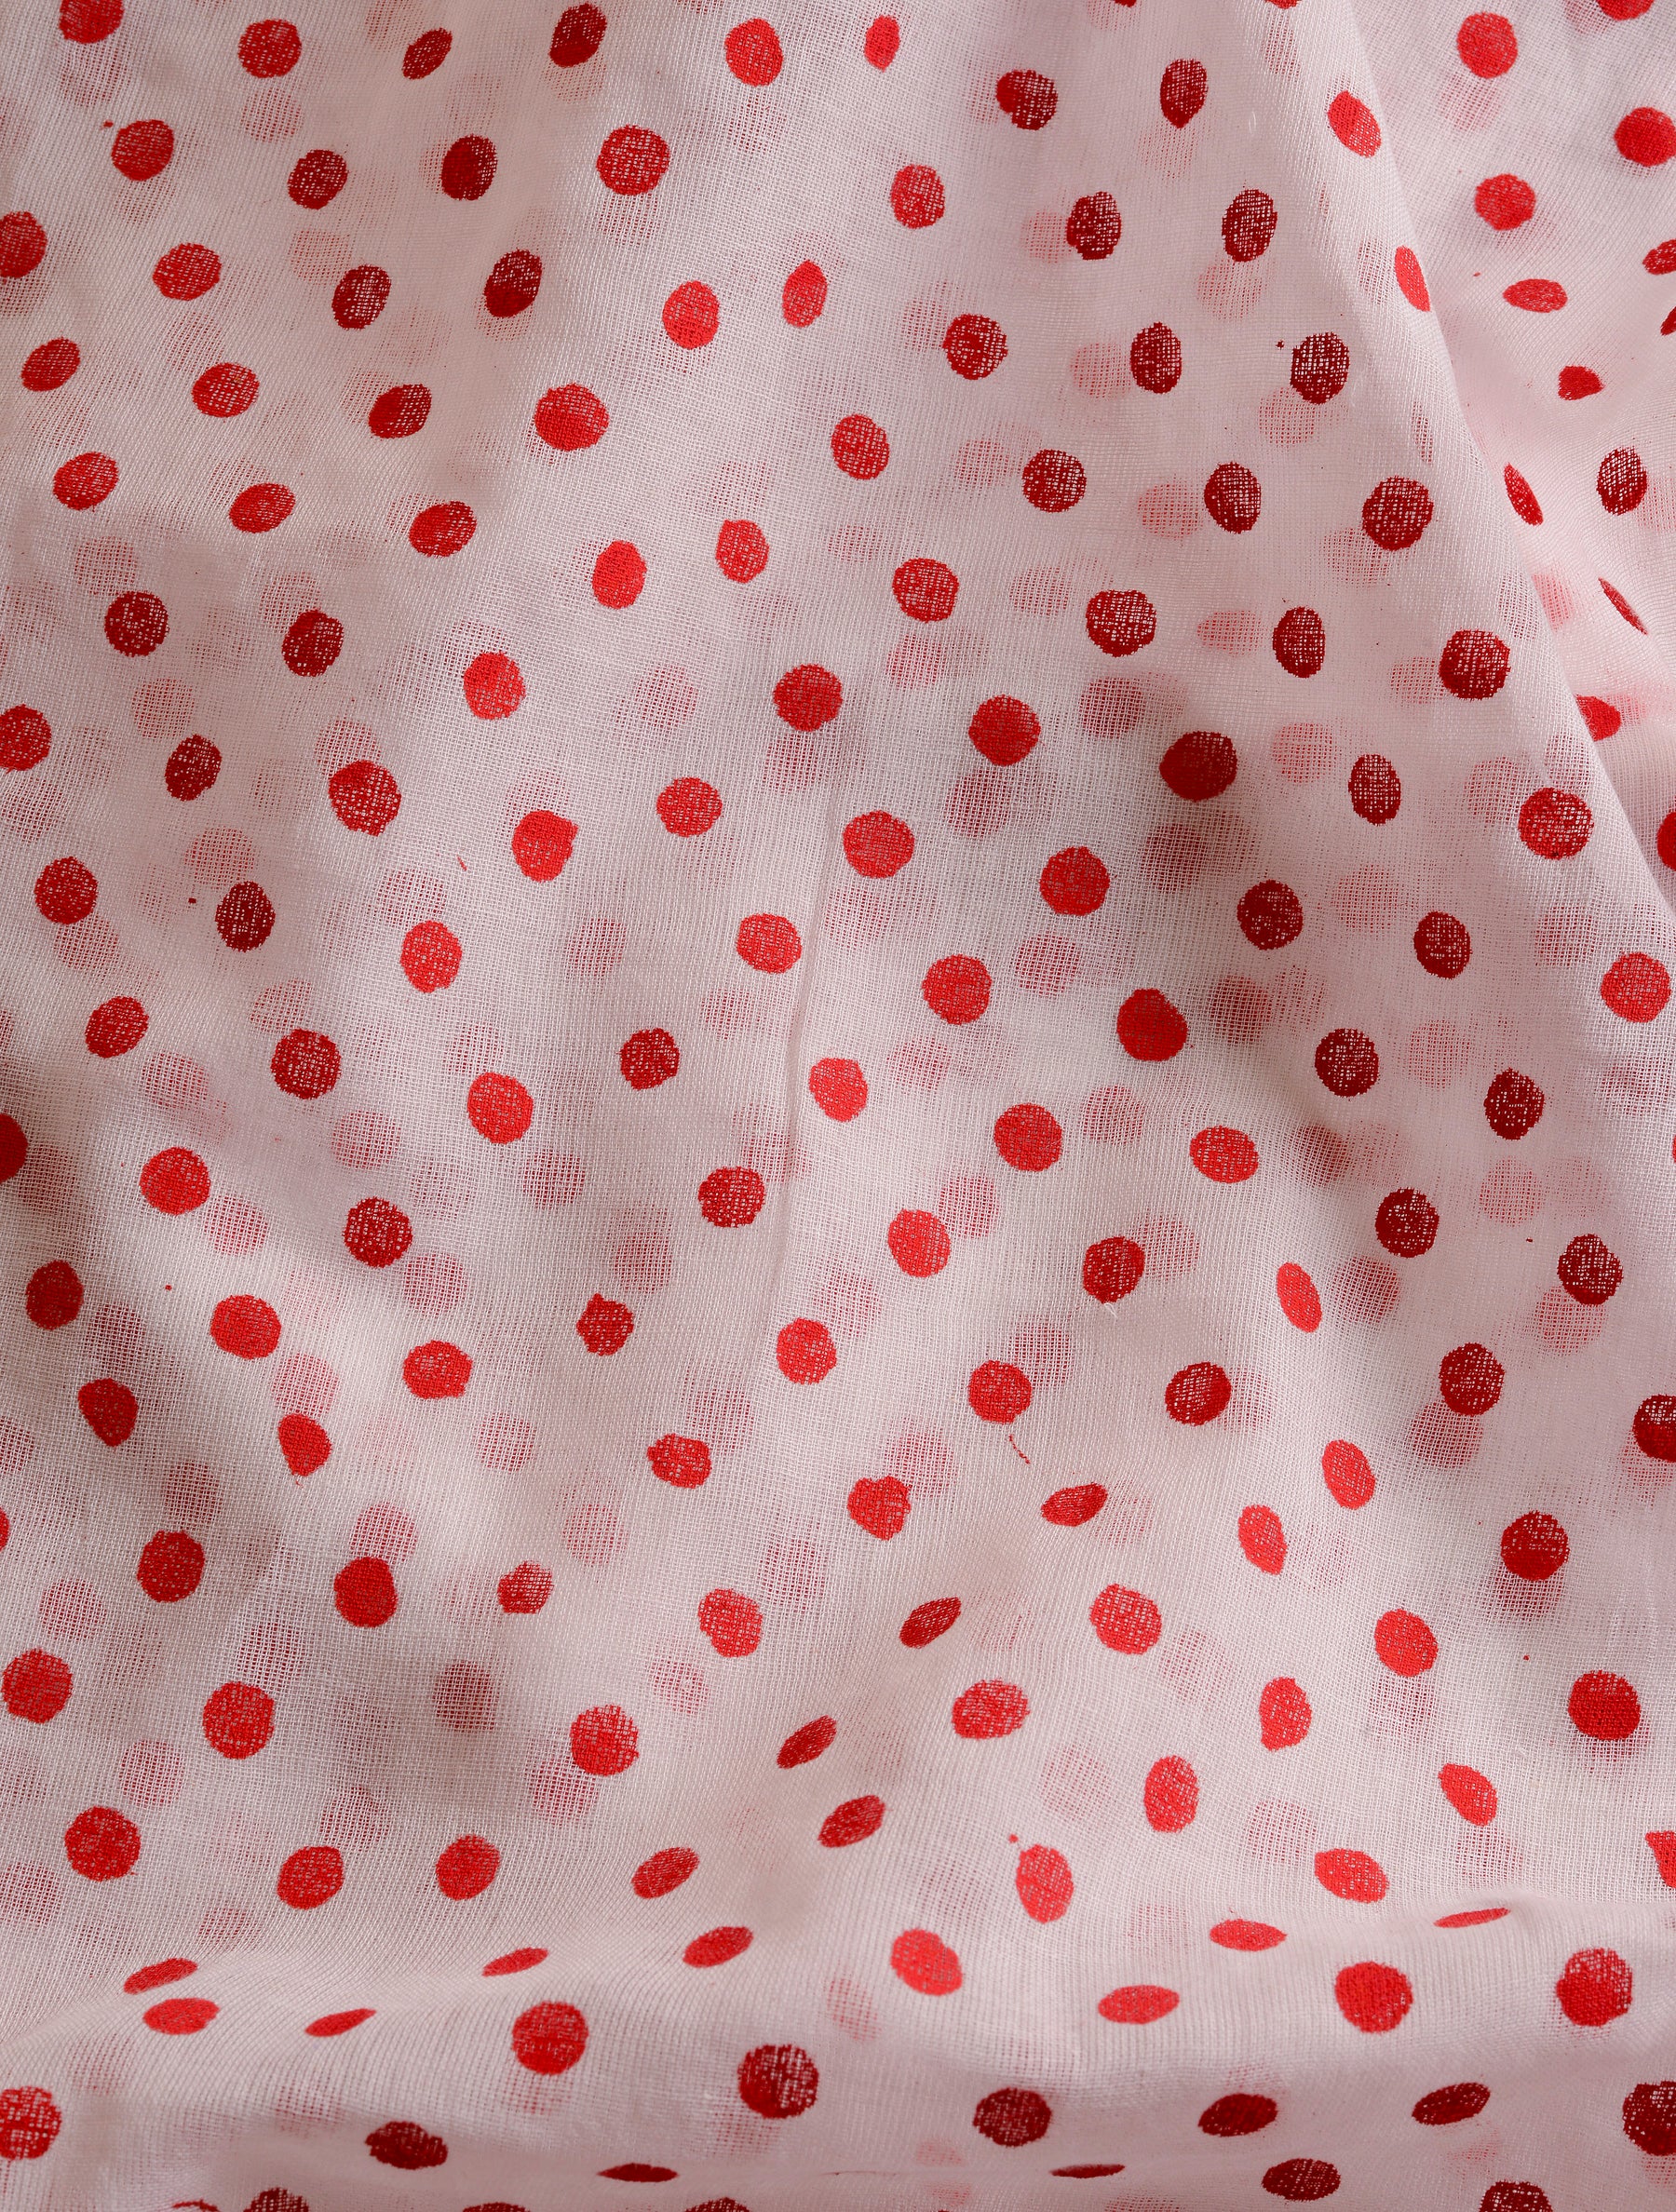 Red & White (All Over Dots)Hand Block Printed Cotton Saree